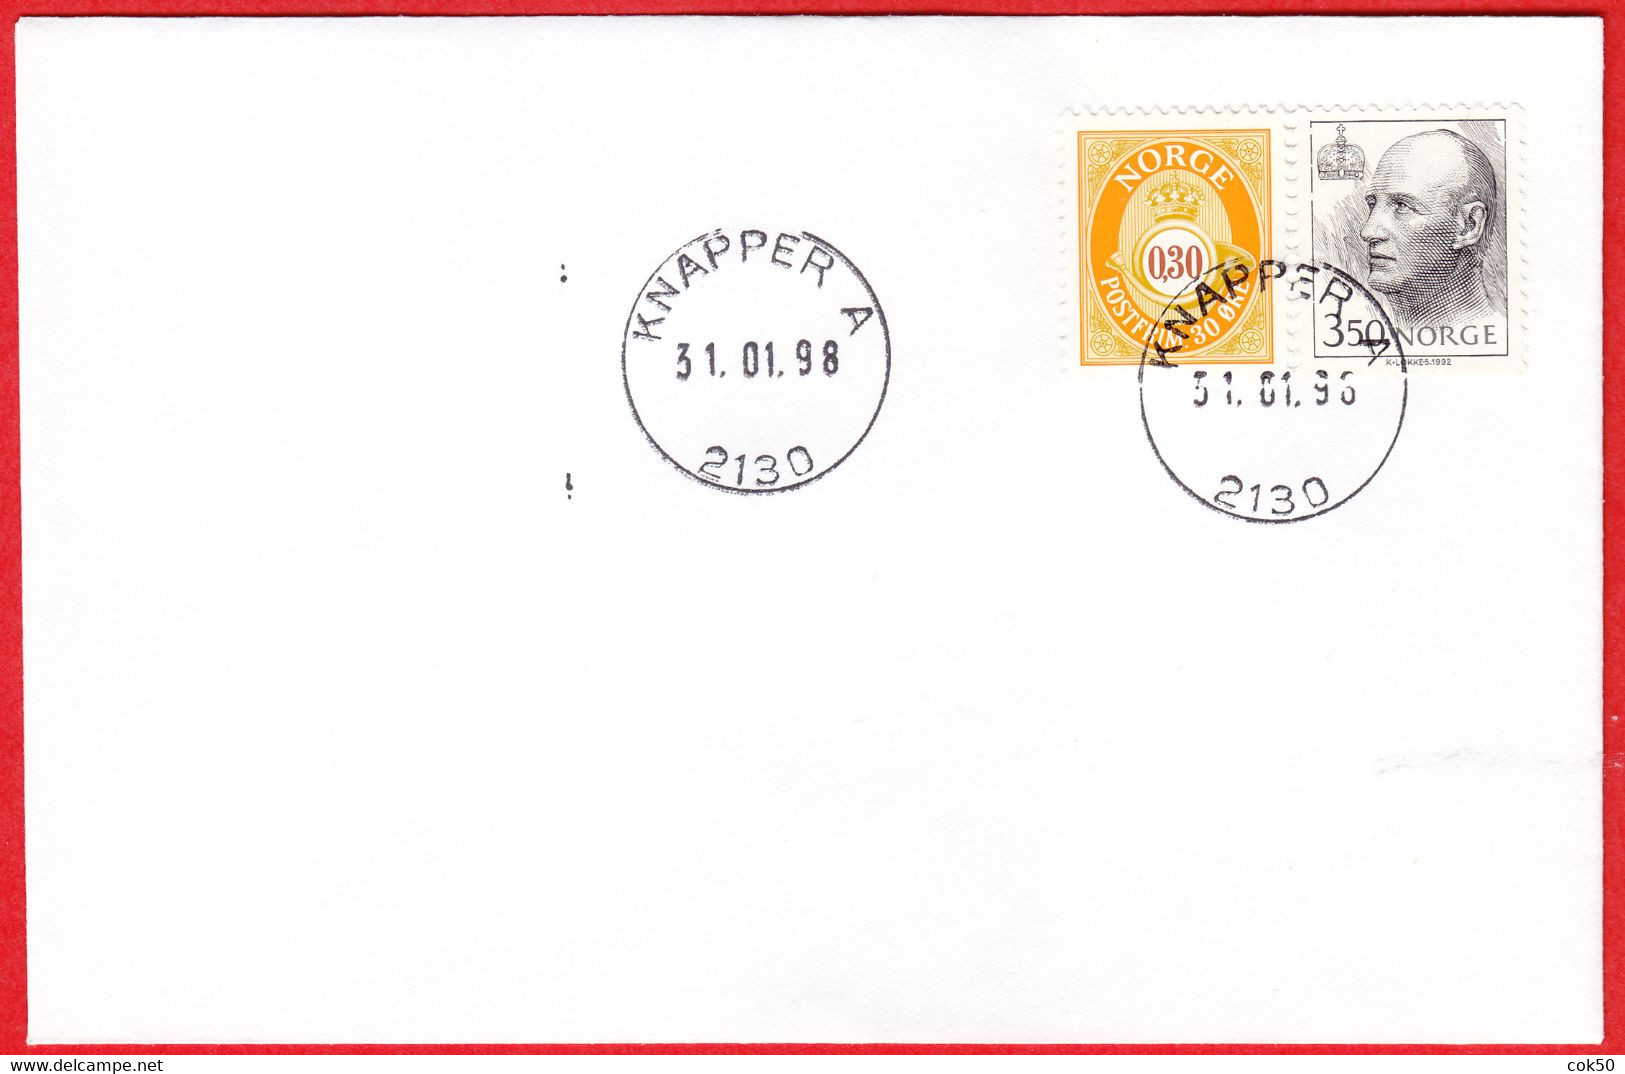 NORWAY - 2130 KNAPPER A (Hedmark County = Innlandet From Jan.1 2020) Last Day - Postoffice Closed On 1998.01.31 - Emissioni Locali